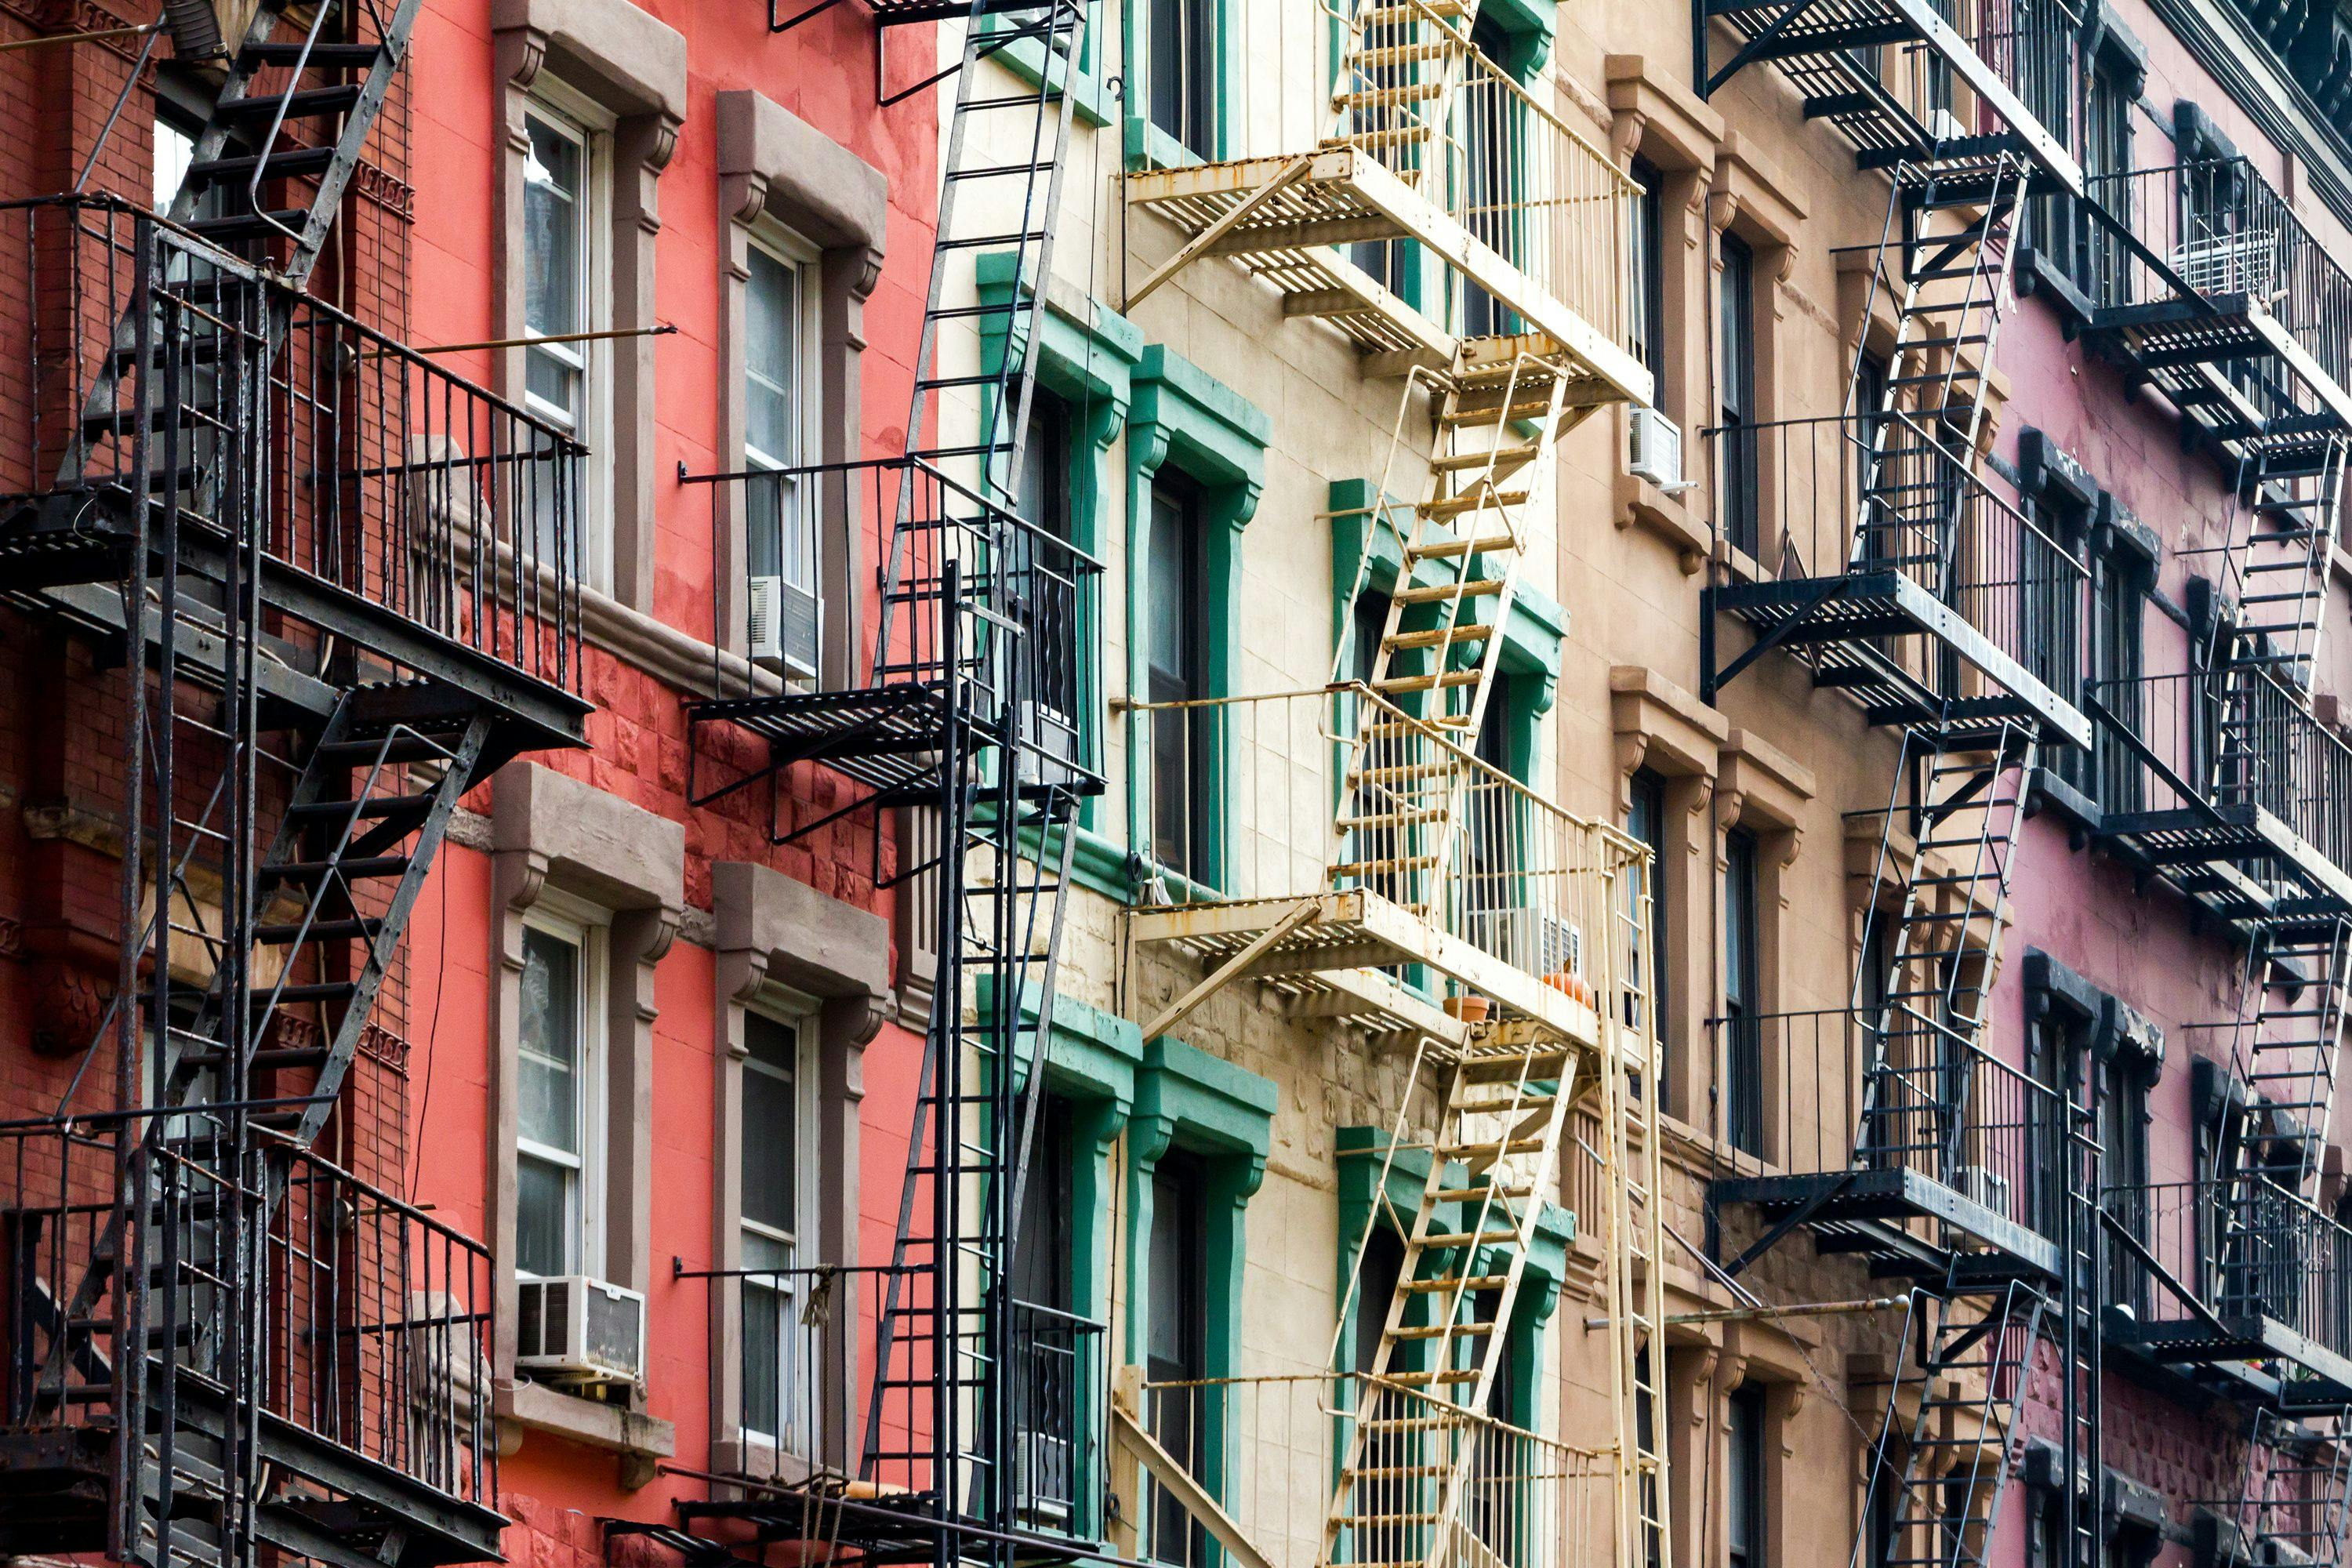 apartments of different colors with fire escapes